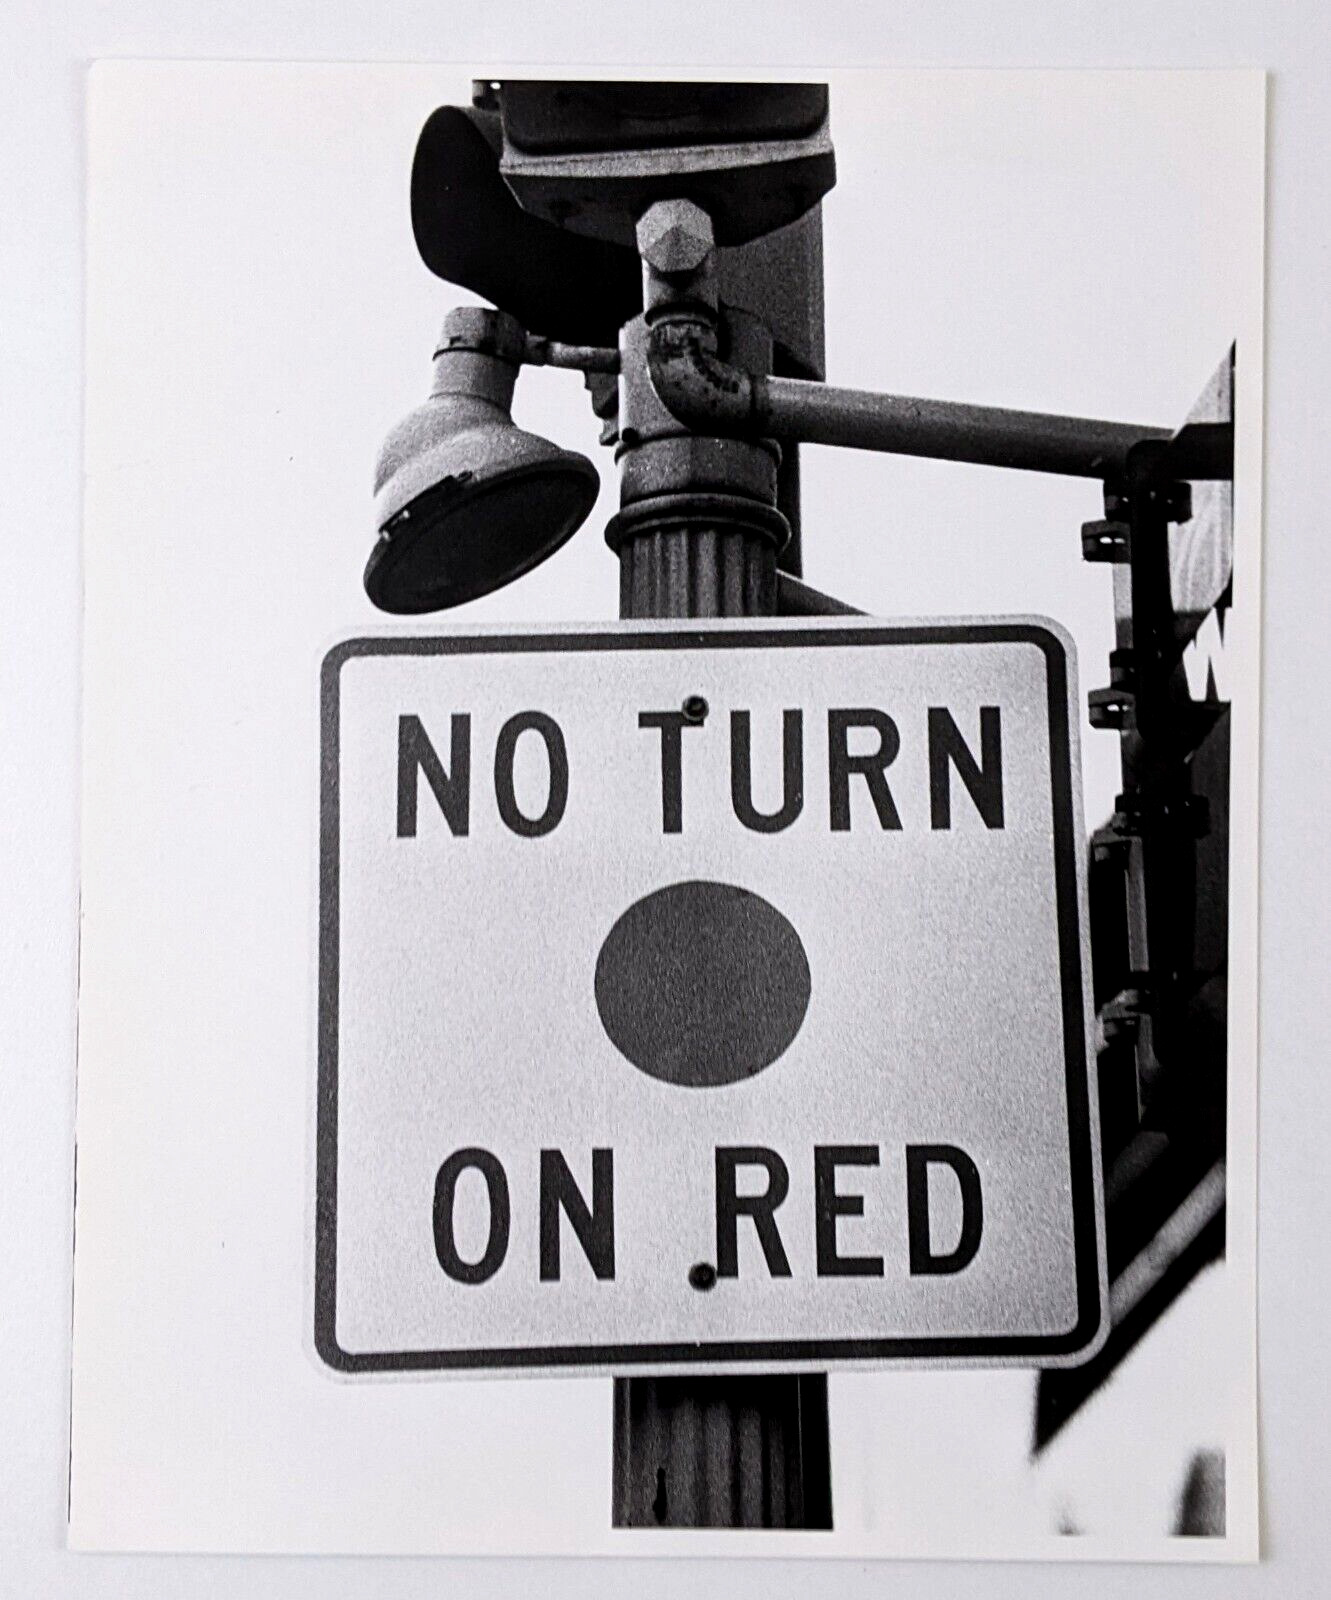 1979 No Turn on Red Traffic Street Sign Vintage Press Photo